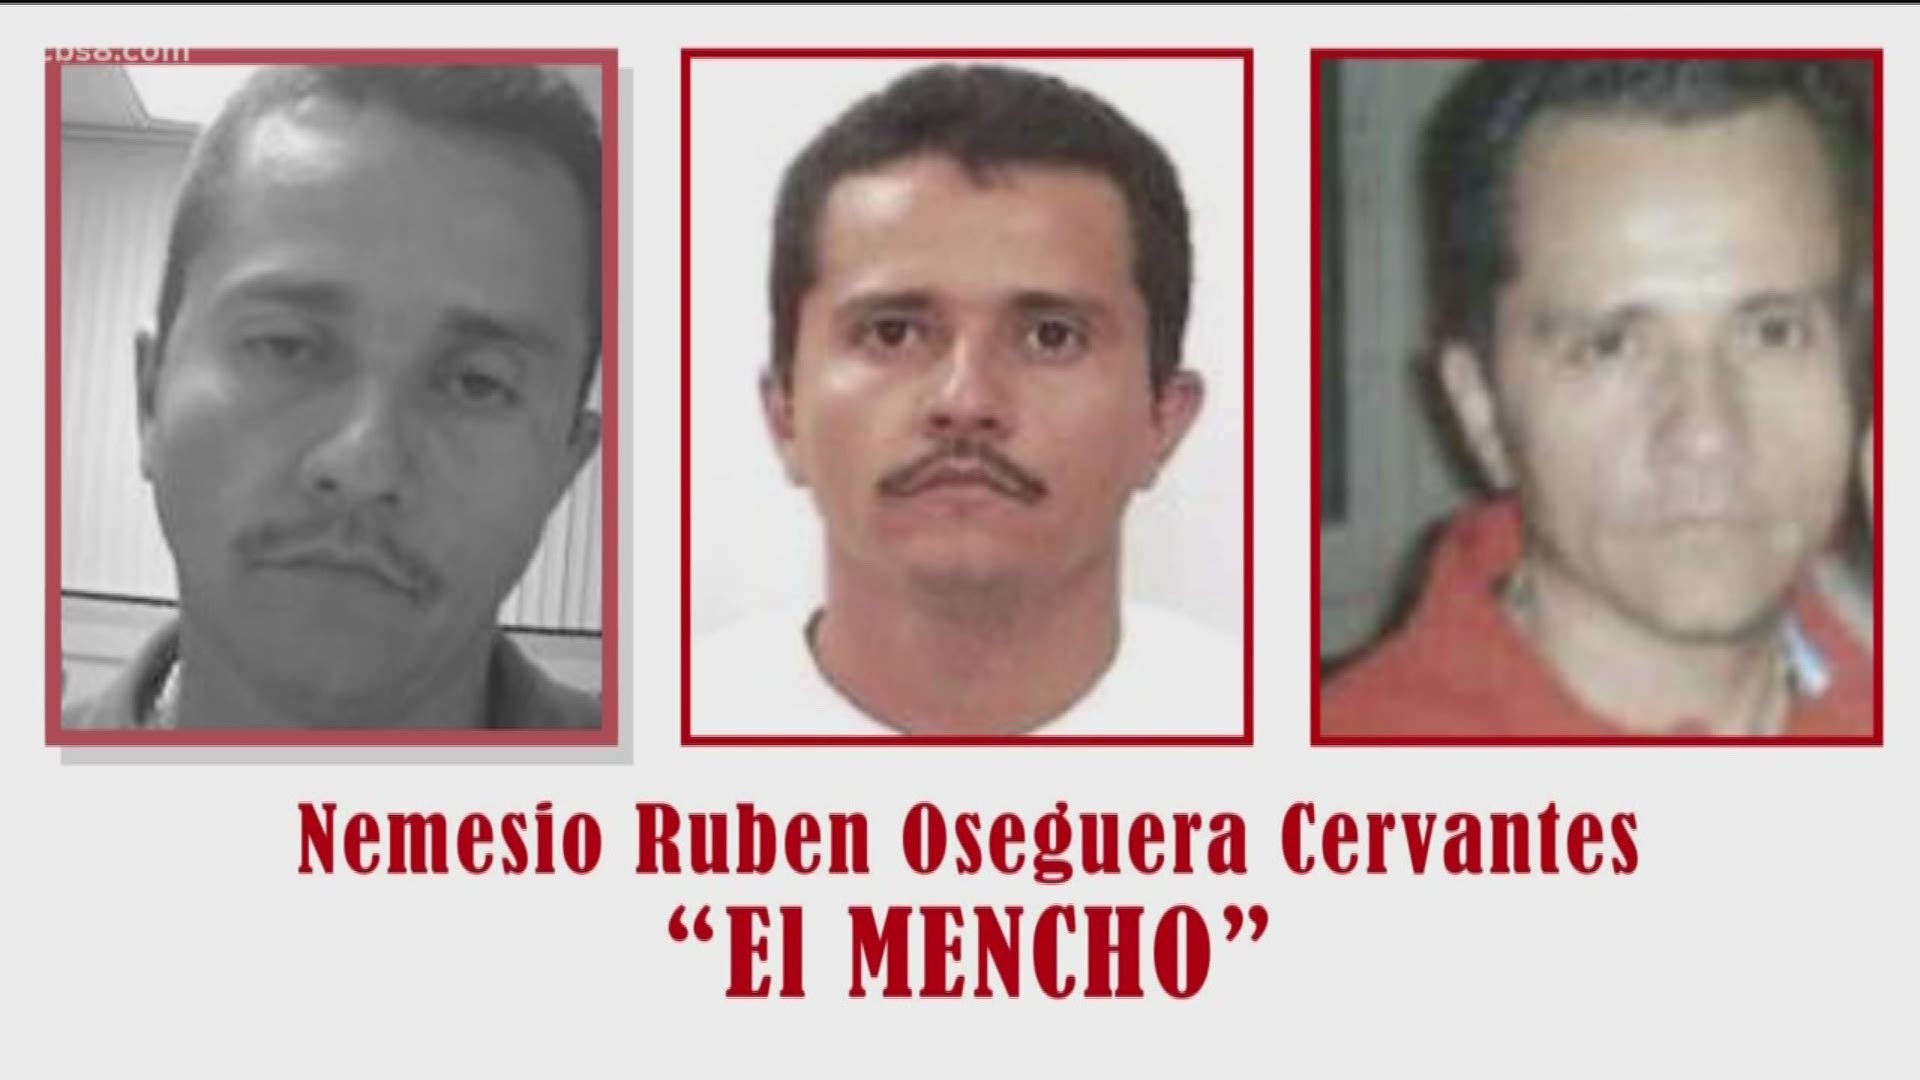 DEA and Justice Department officials opened up about a multi-agency operation targeting the Cartel de Jalisco Nueva Generacion.